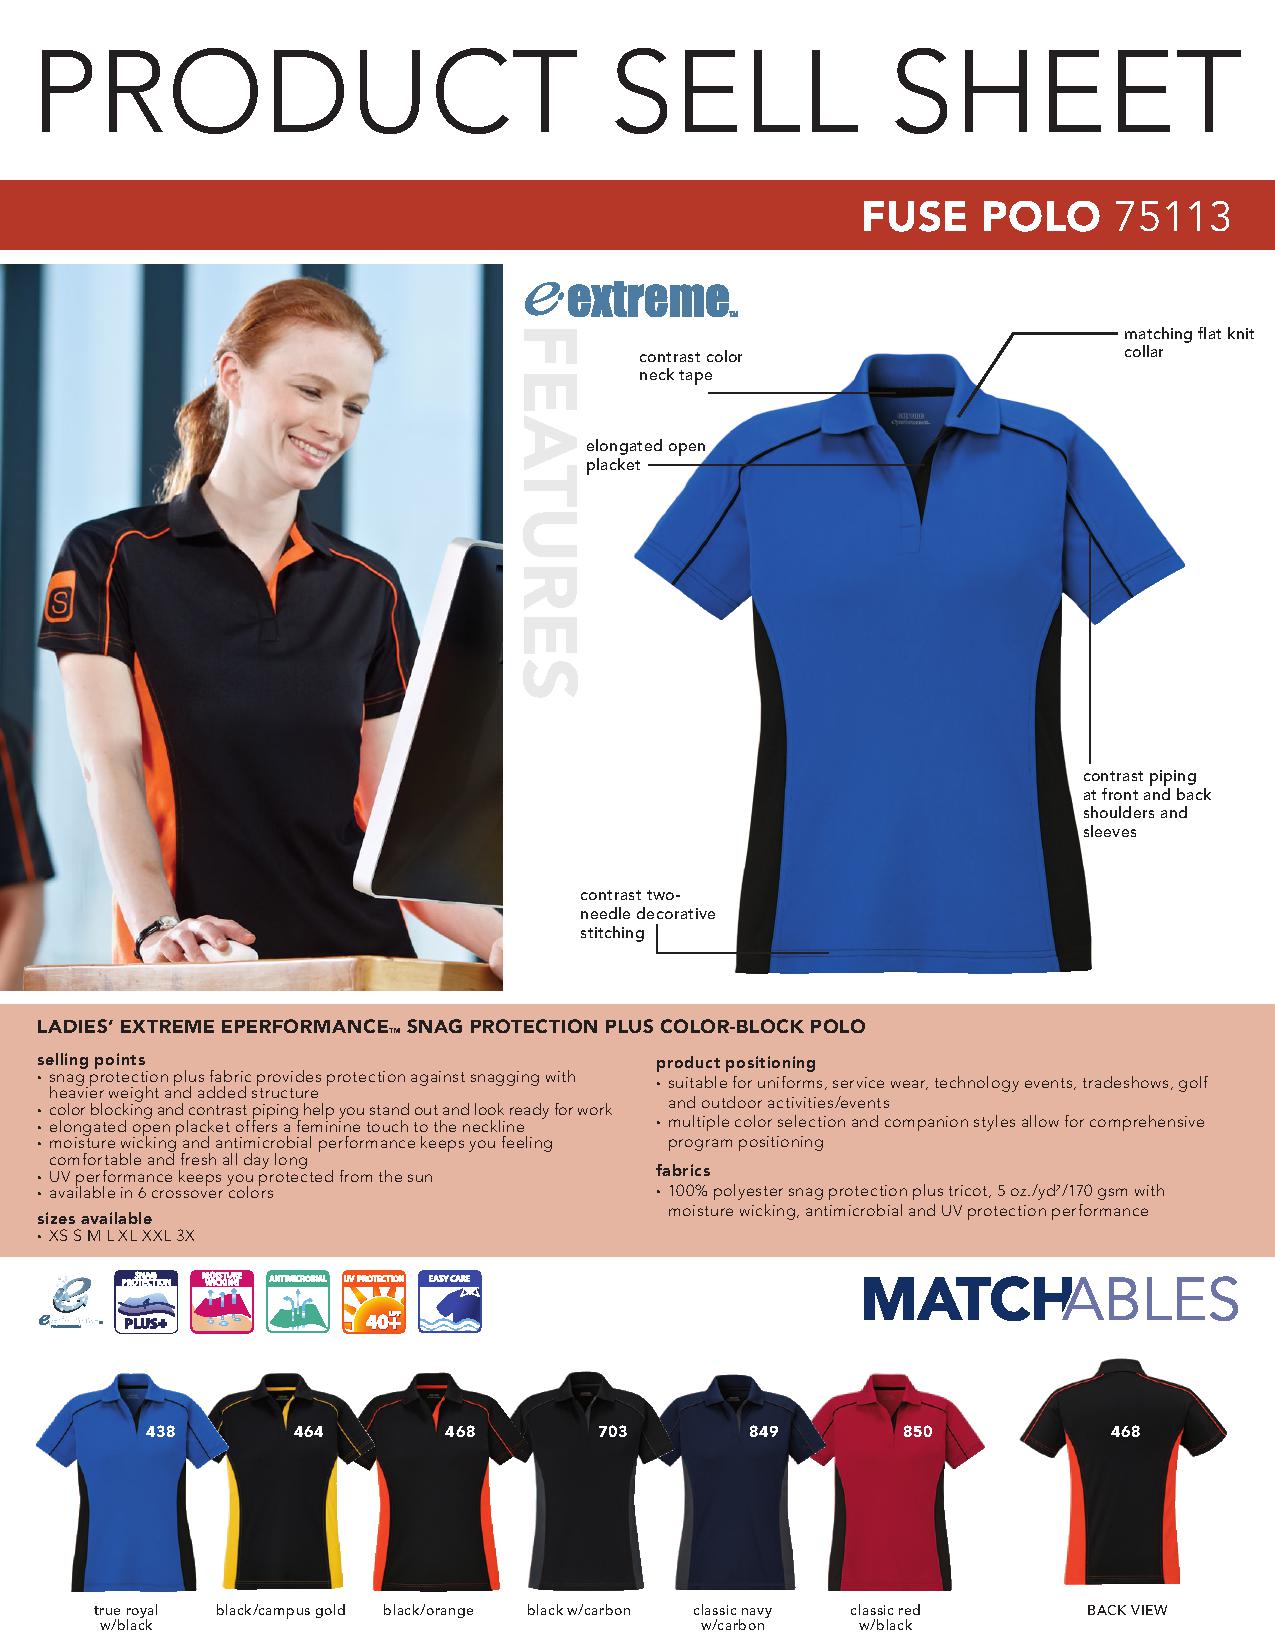 Ash City Eperformance 75113 - Fuse Polo Ladies' Snag Protection Plus Color-Block Polo